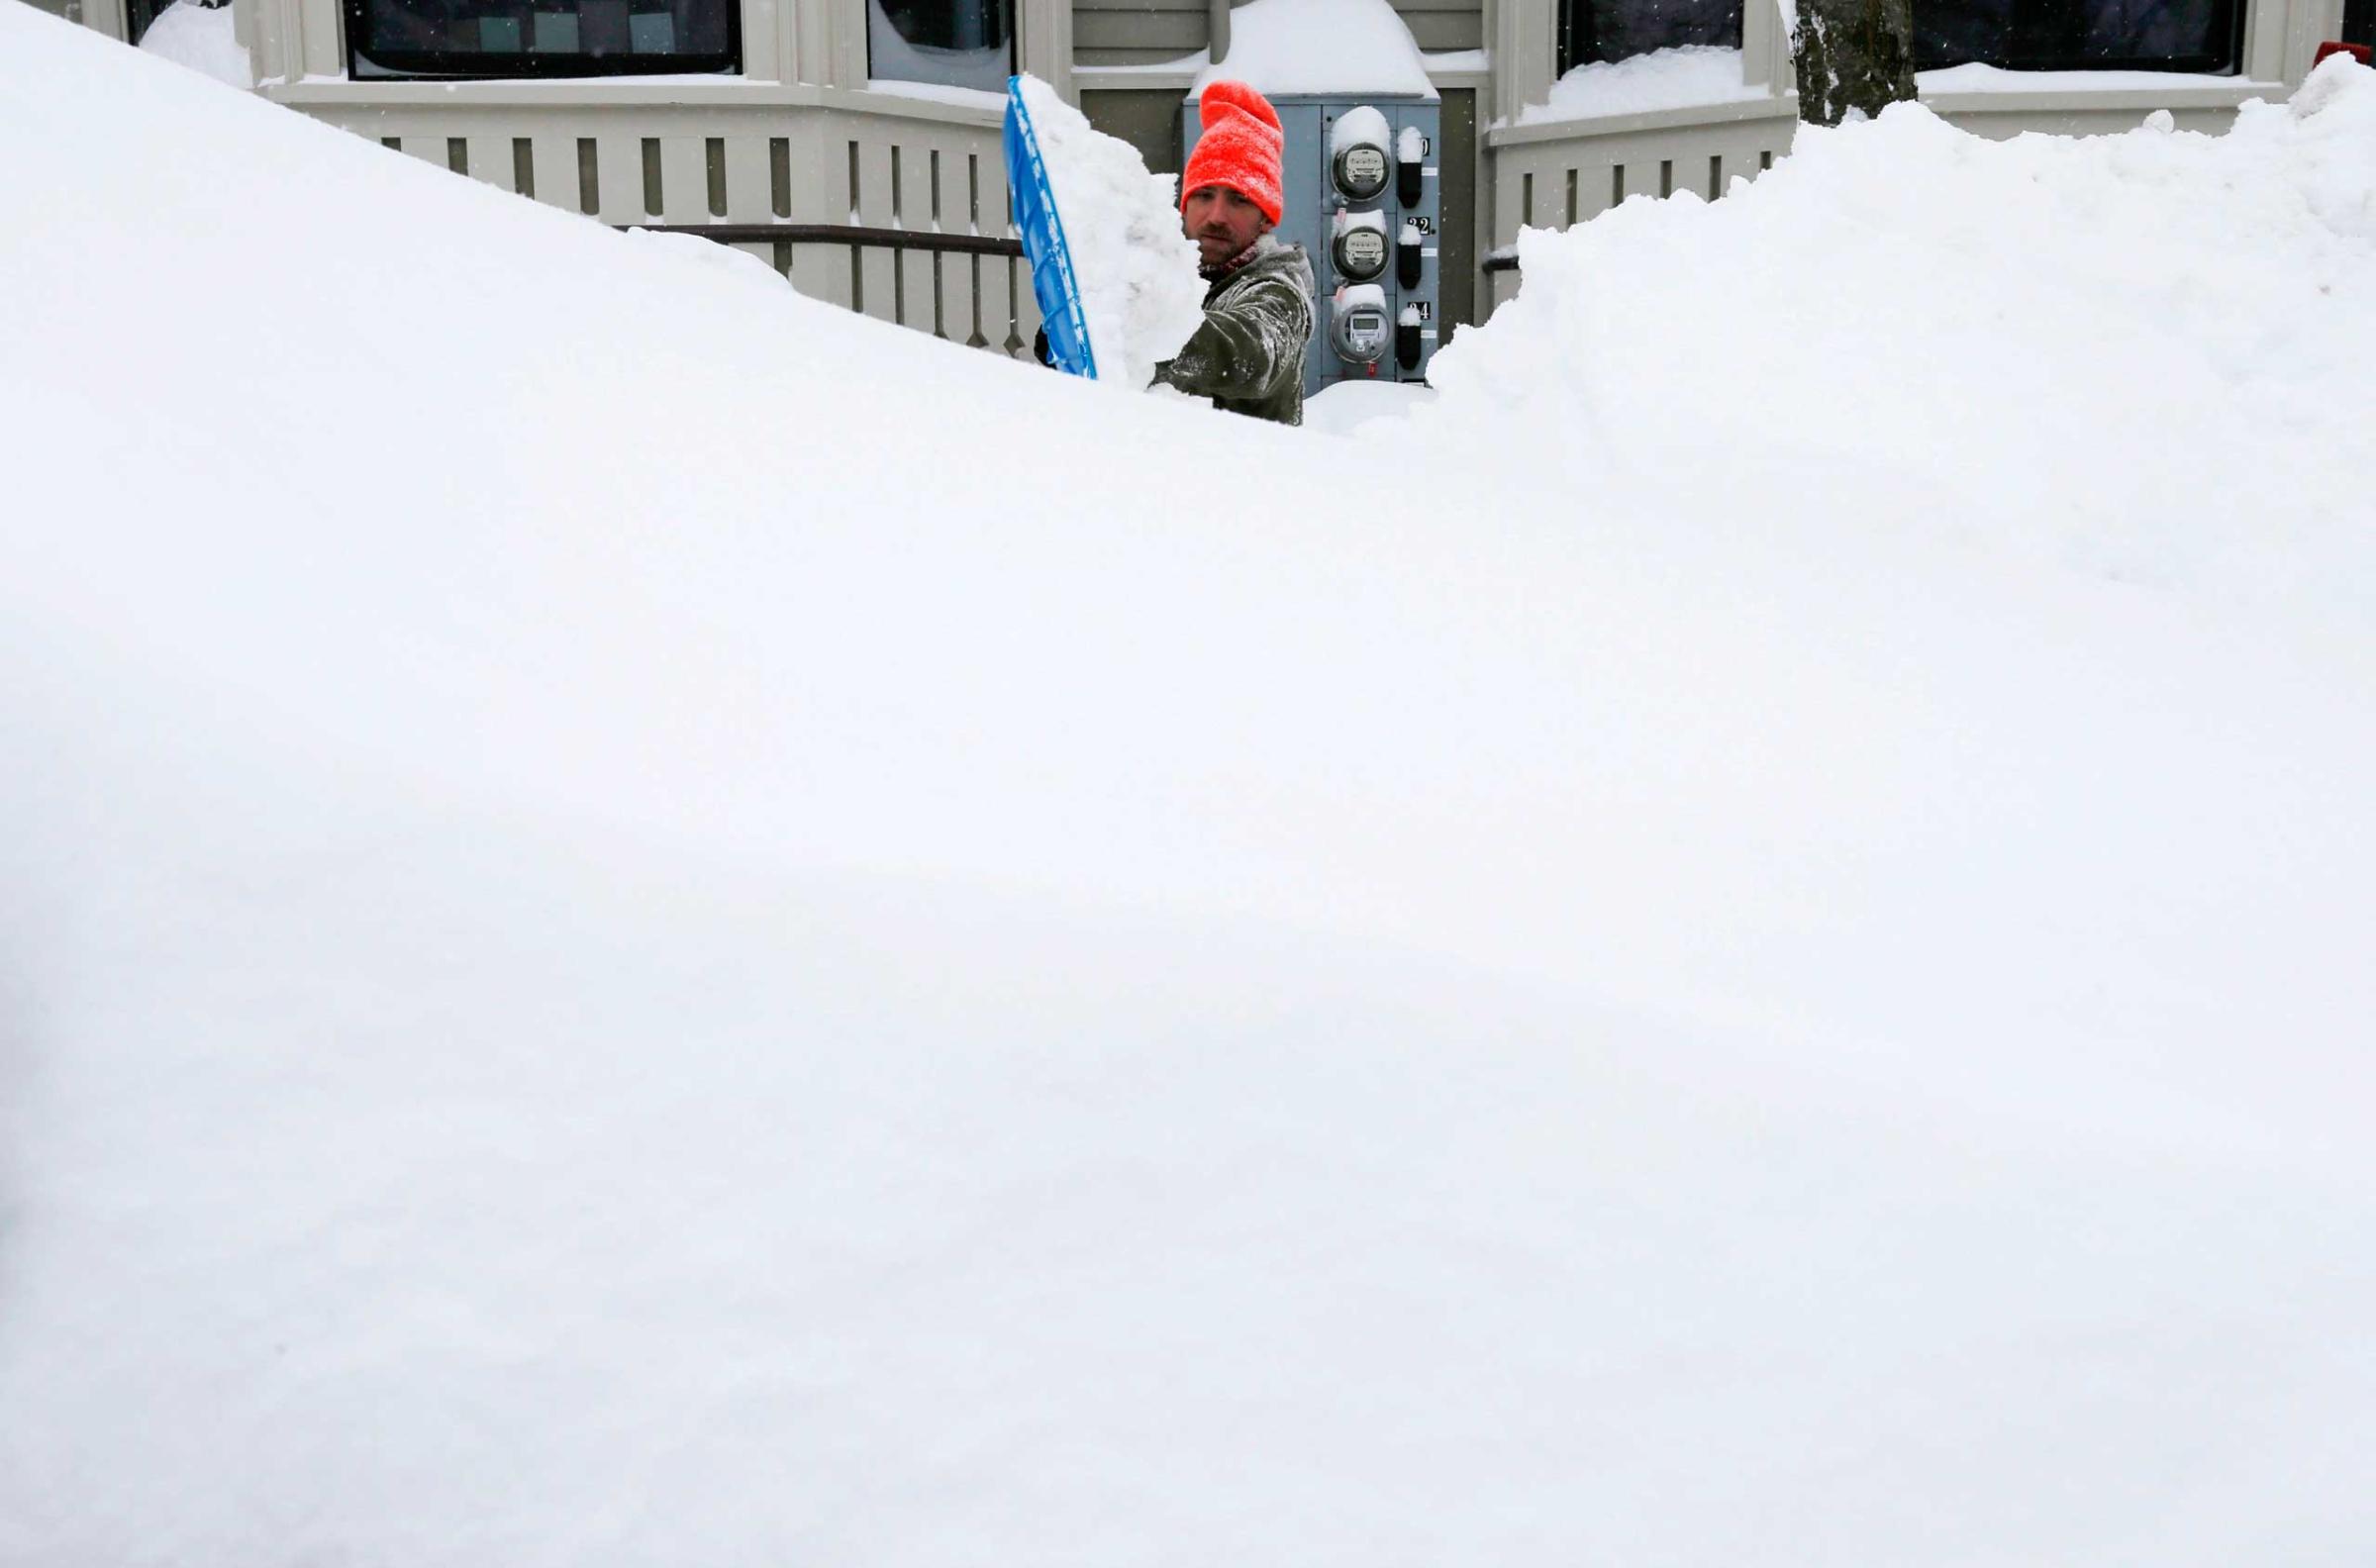 Burkett clears the snow from the front of his house during a winter snowstorm in Cambridge